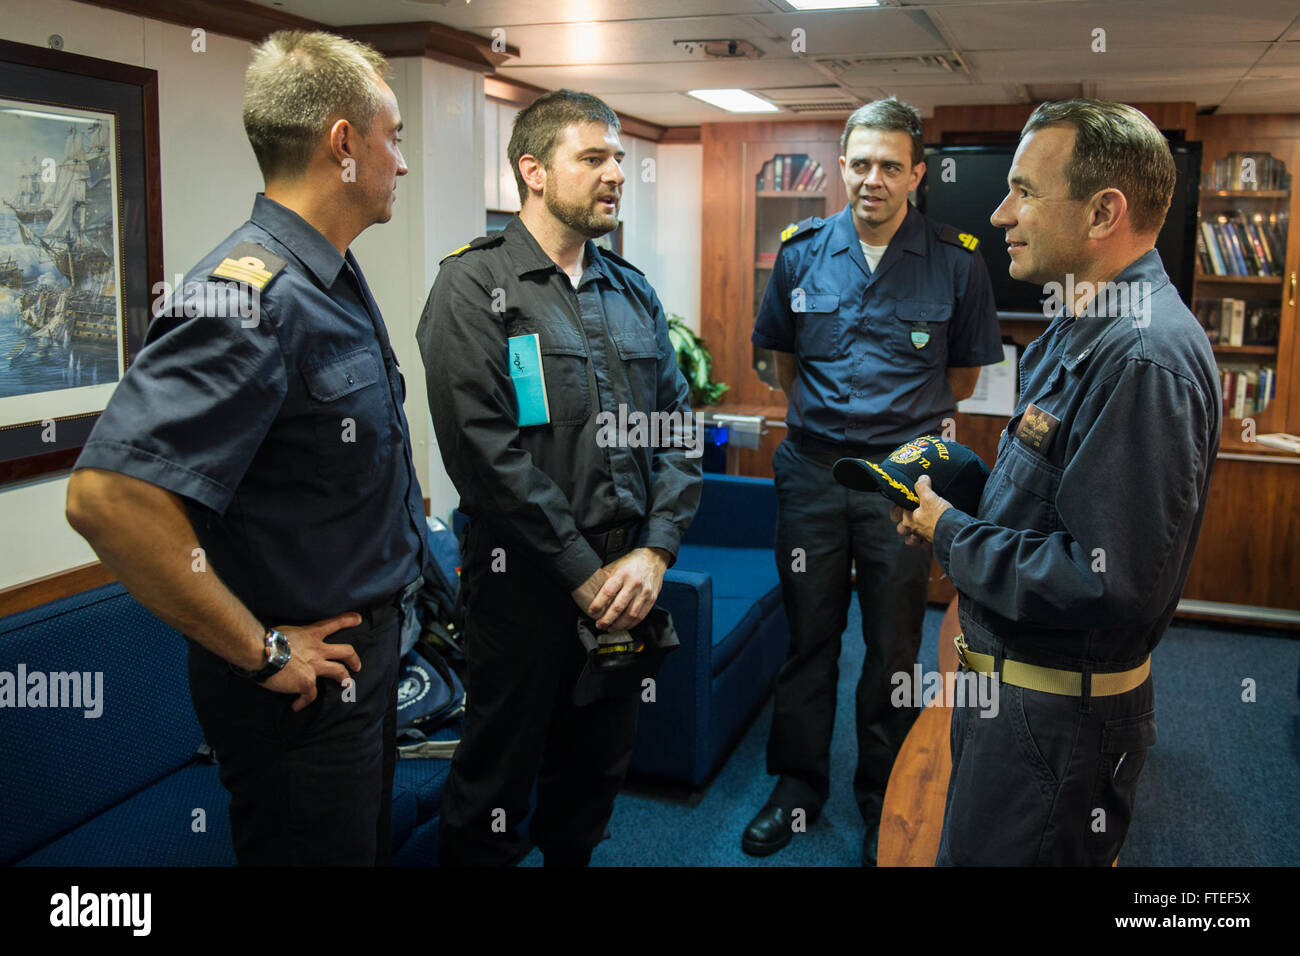 140625-N-KE519-005 MEDITERRANEAN SEA (June 25, 2014) - Capt. Robert Katz (right), commanding officer of the Ticonderoga-class guided-missile cruiser USS Vella Gulf (CG 72), speaks with sailors from the Spanish navy frigate Cristobal Colon (F 105) prior to a planning conference in the ship's wardroom. Vella Gulf, homeported in Norfolk, Va., is conducting naval operations with allies in the U.S. 6th Fleet area of operations in order to advance security and stability in Europe. (U.S. Navy photo by Mass Communication Specialist 3rd Class Edward Guttierrez III/RELEASED)  Join the conversation on <a Stock Photo